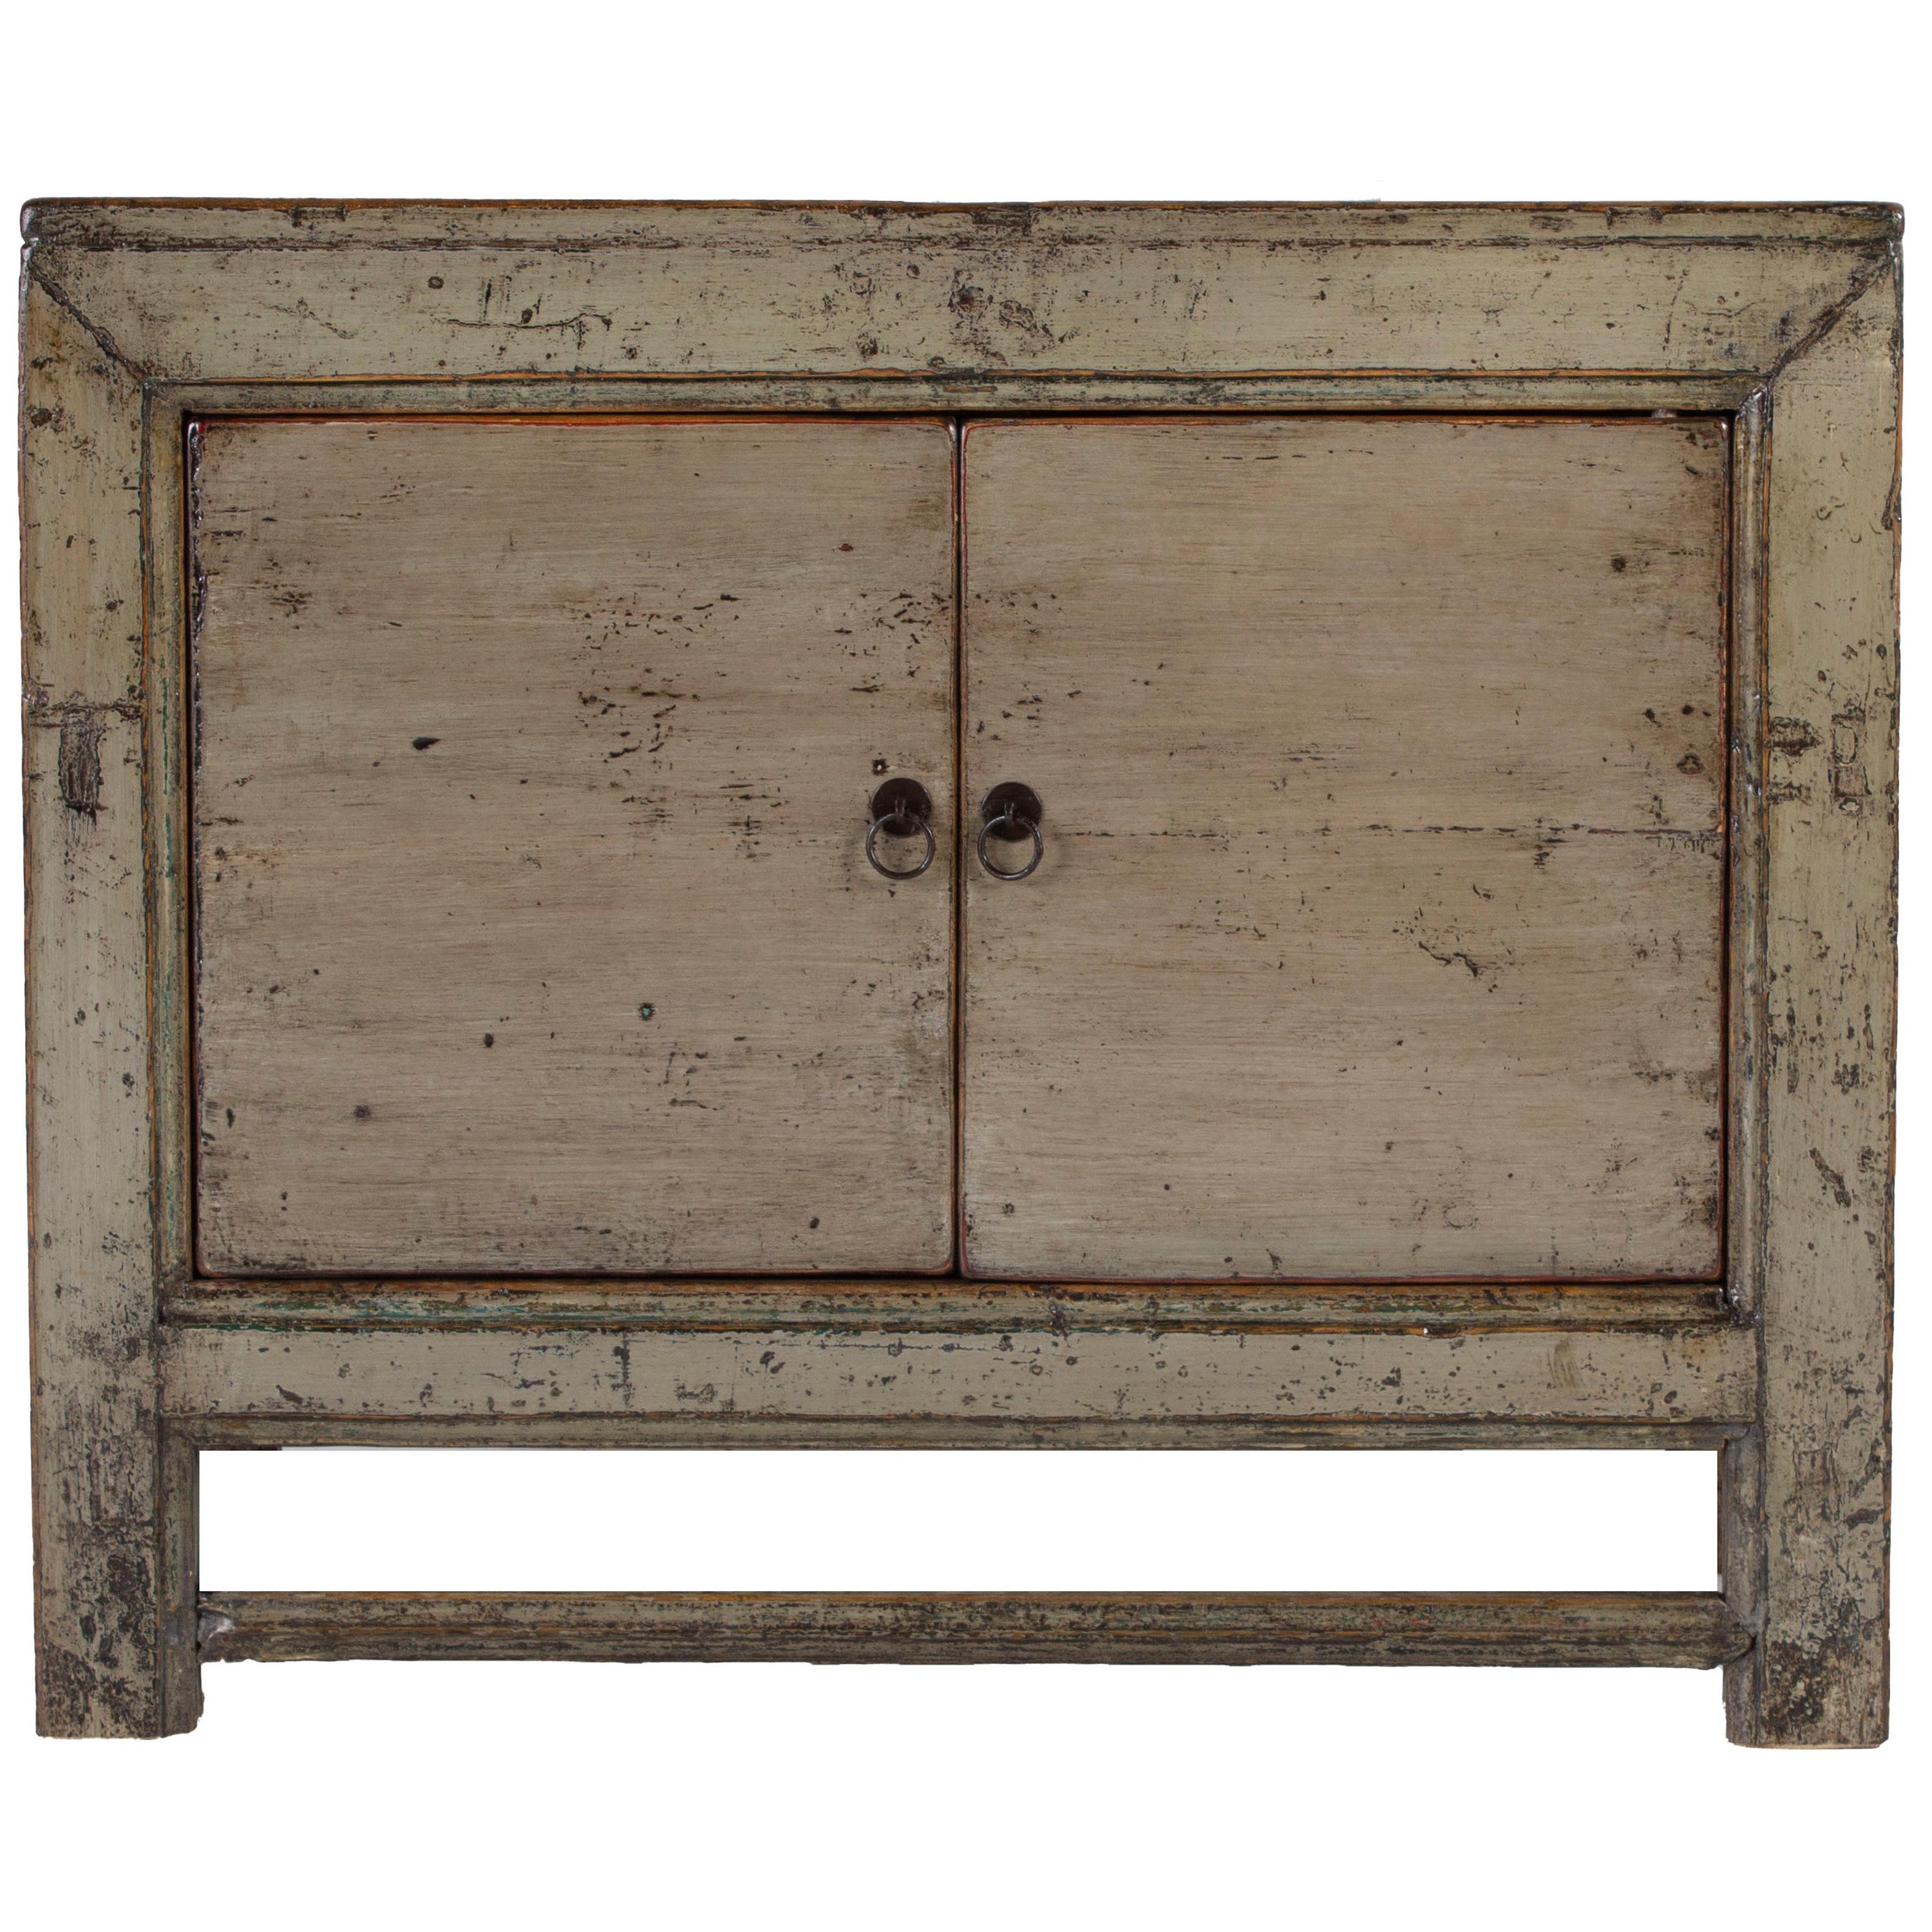 Vintage Two-Door Lacquered Patina Cabinet